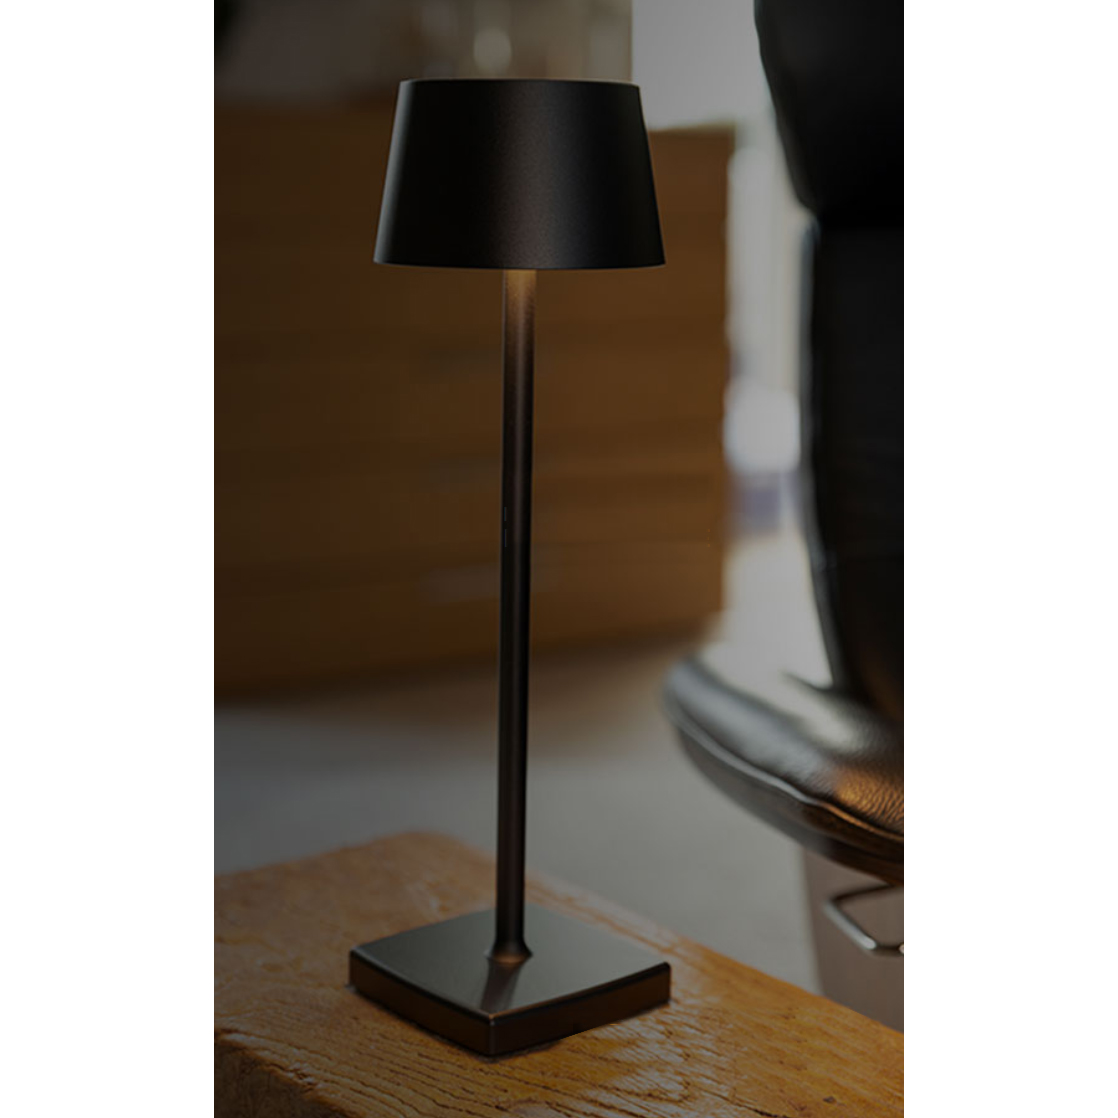 Orange One ingenious dimmable LED table - black portable, rechargeable lamp